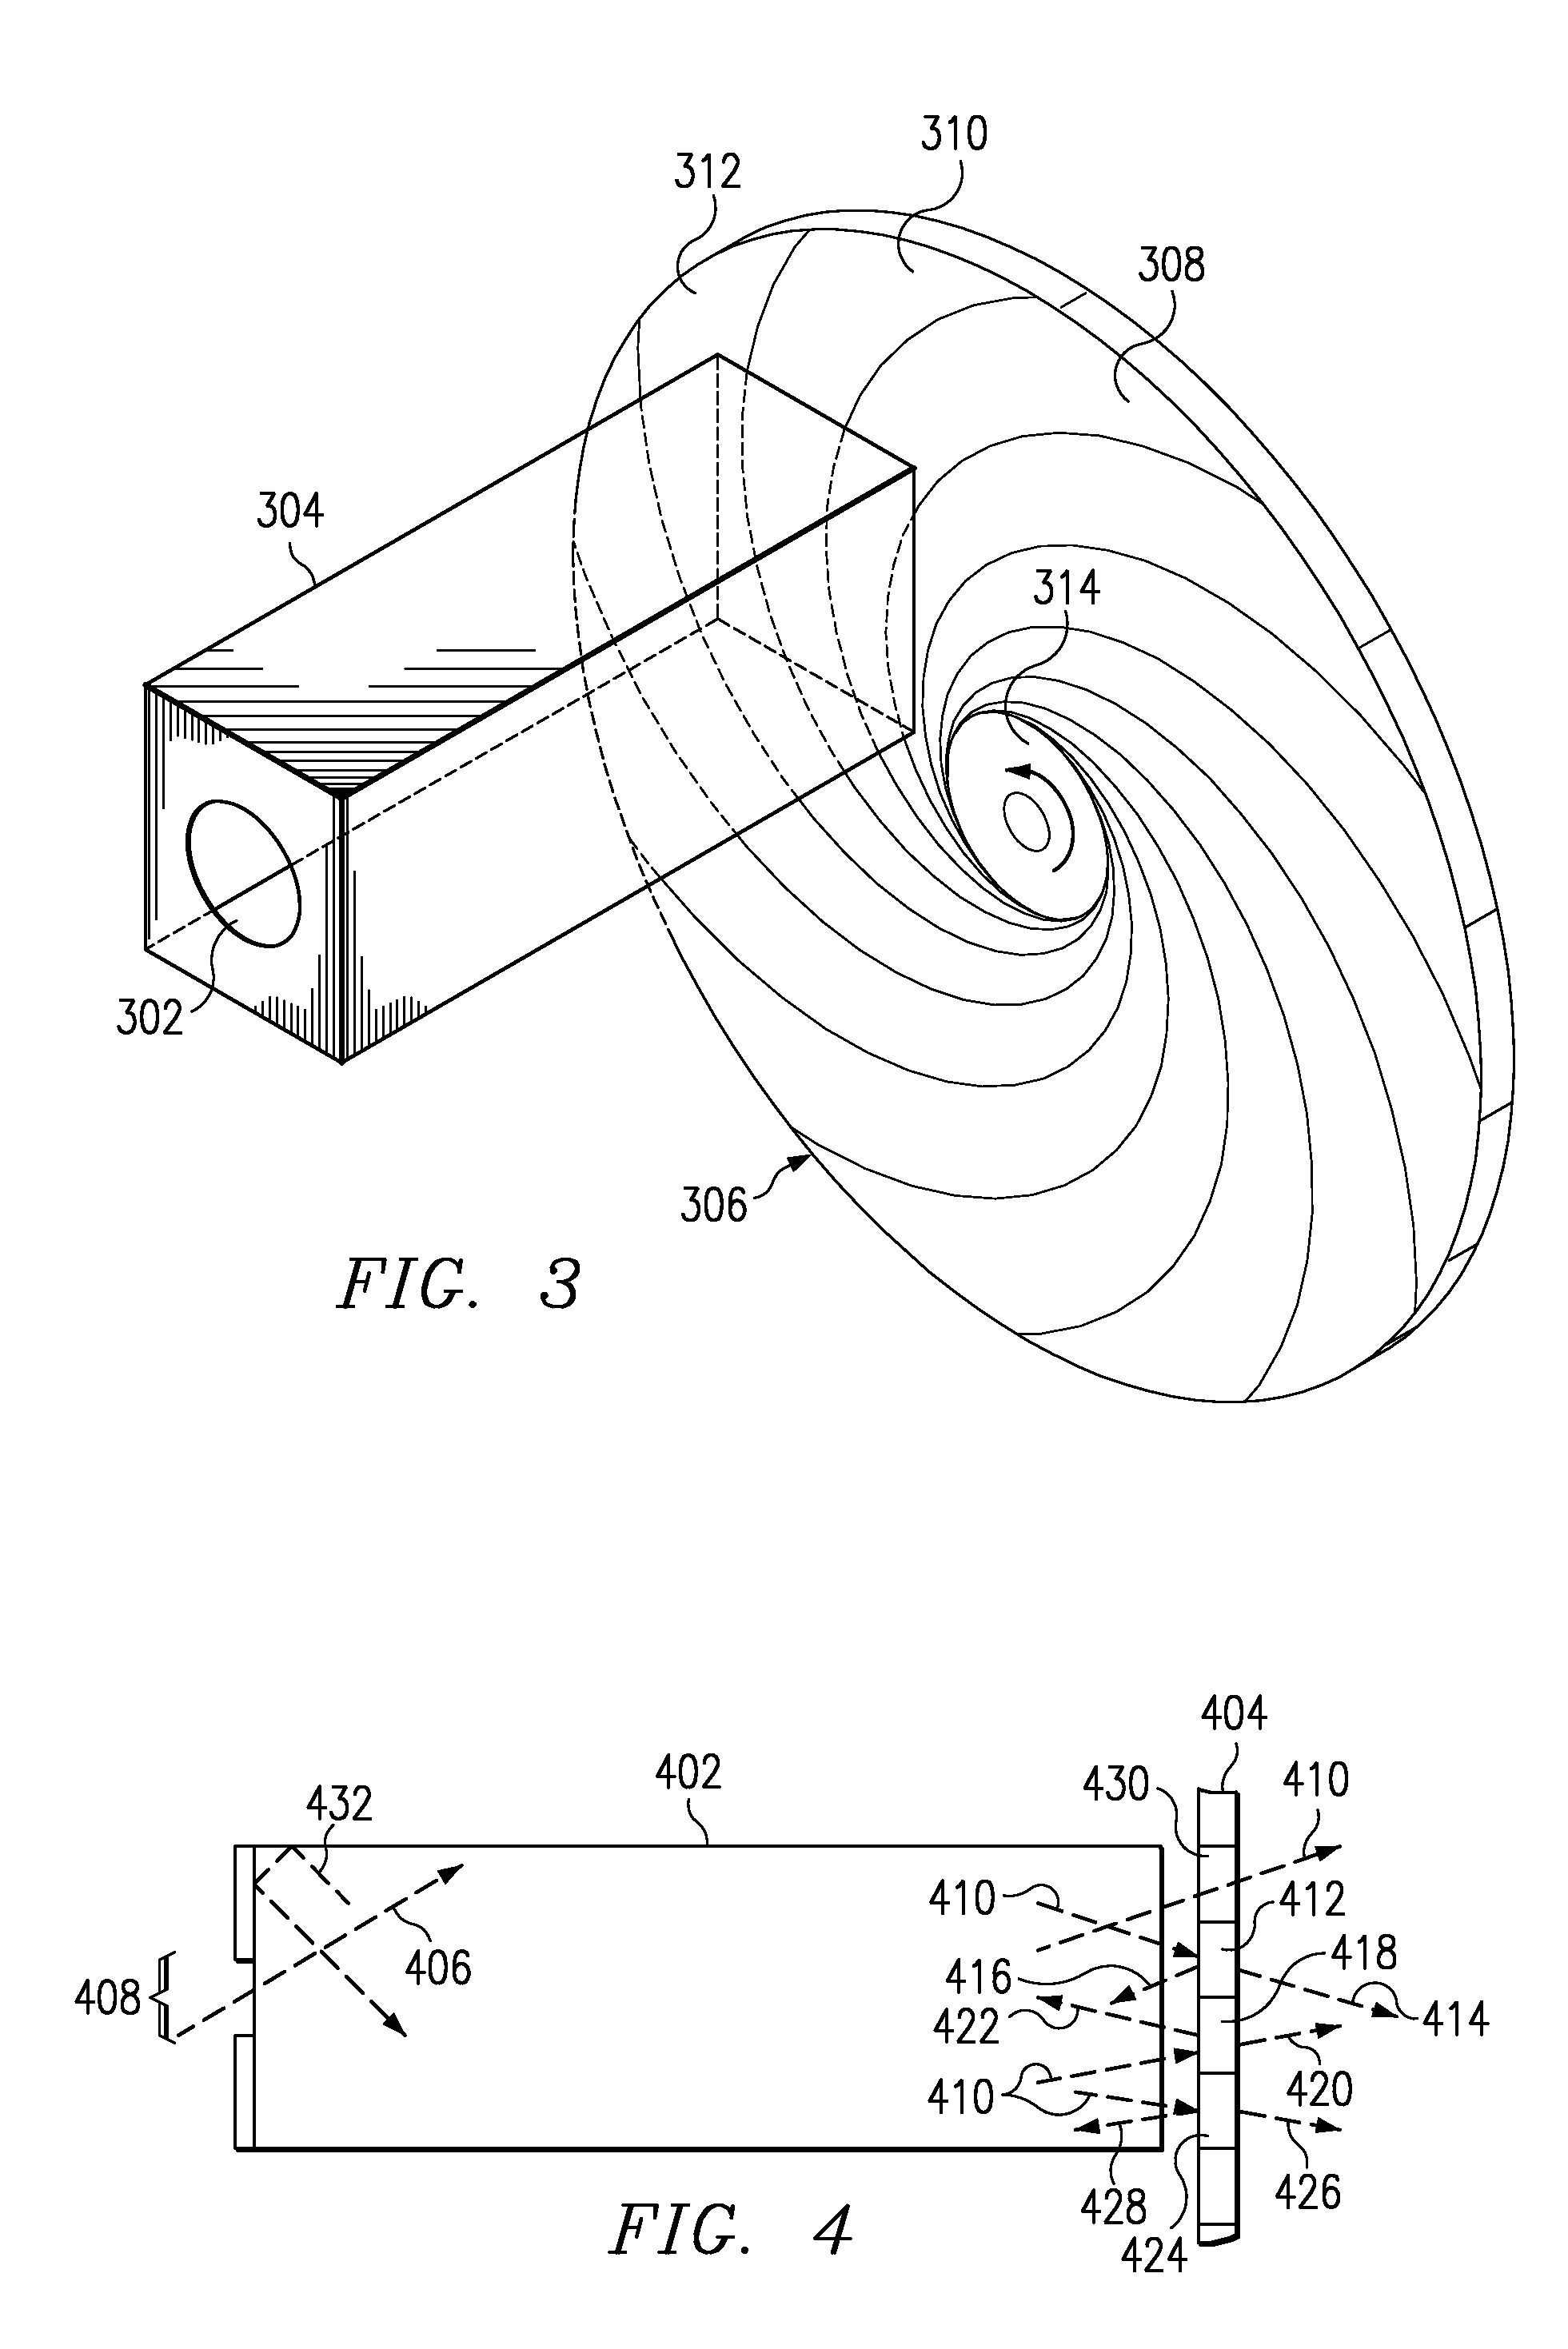 Three Dimensional Projection System